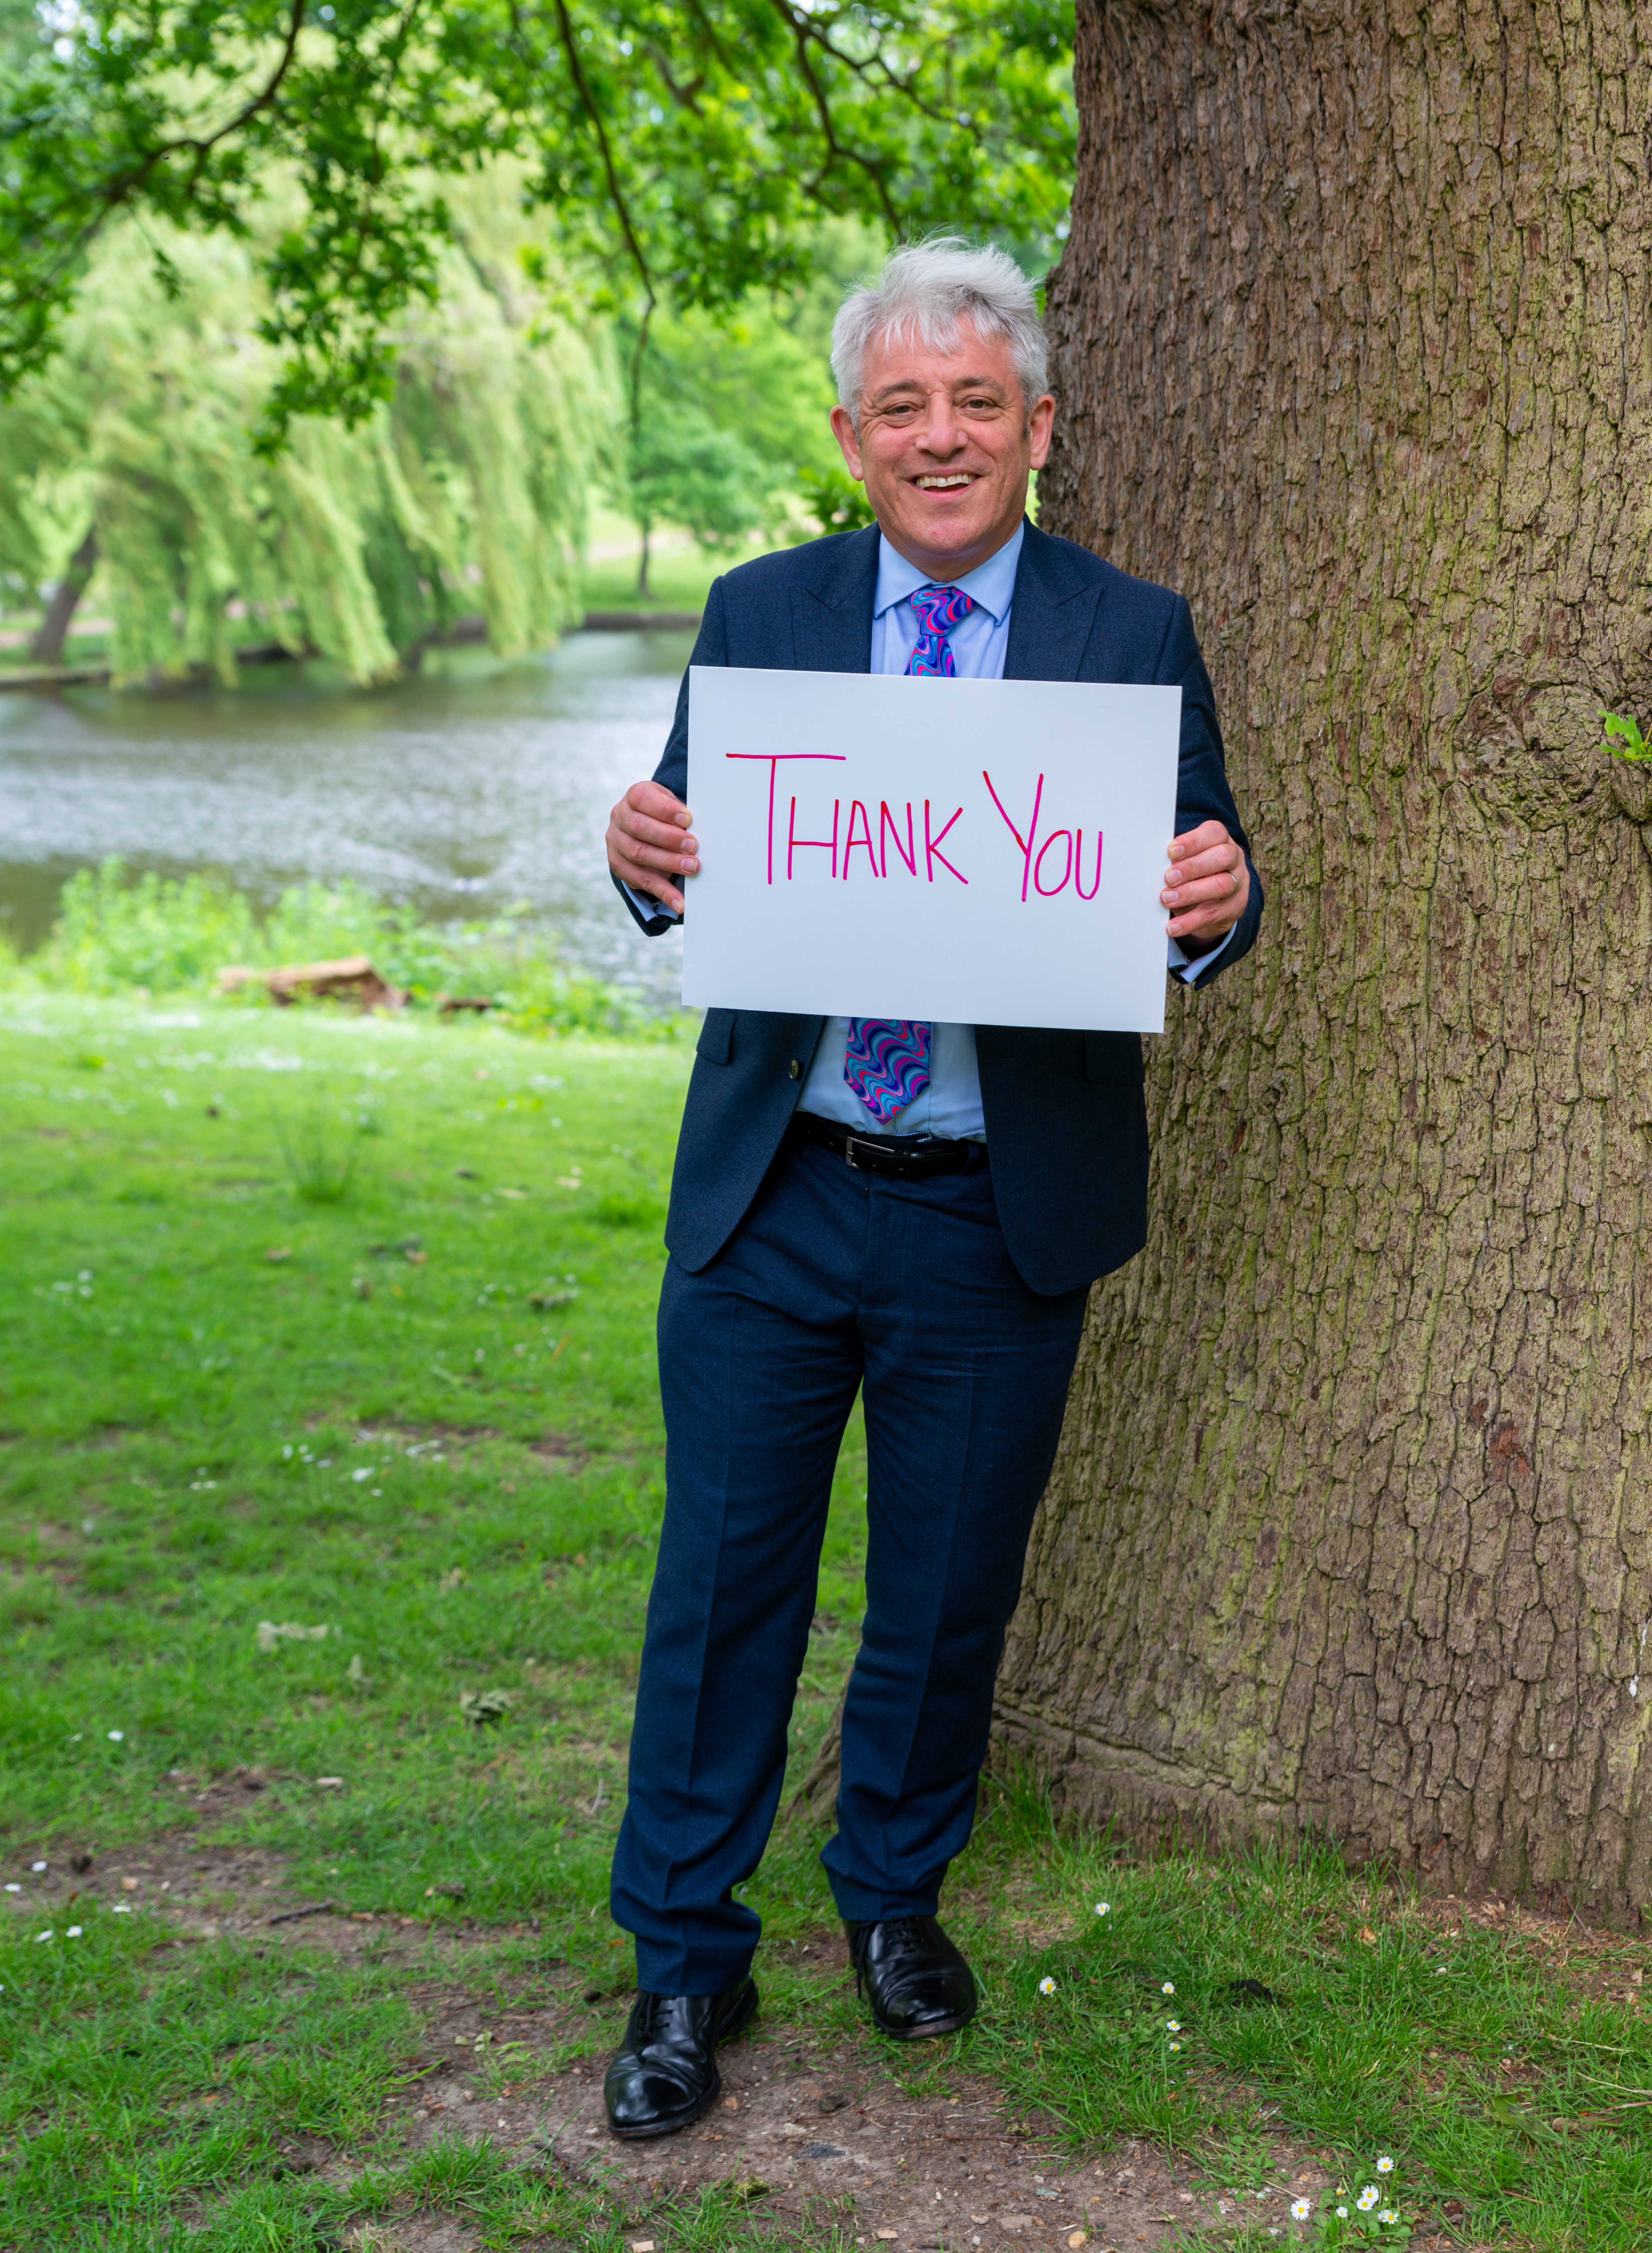 John Bercow on the ground of Wivenhoe Park holding a 'thank you' sign